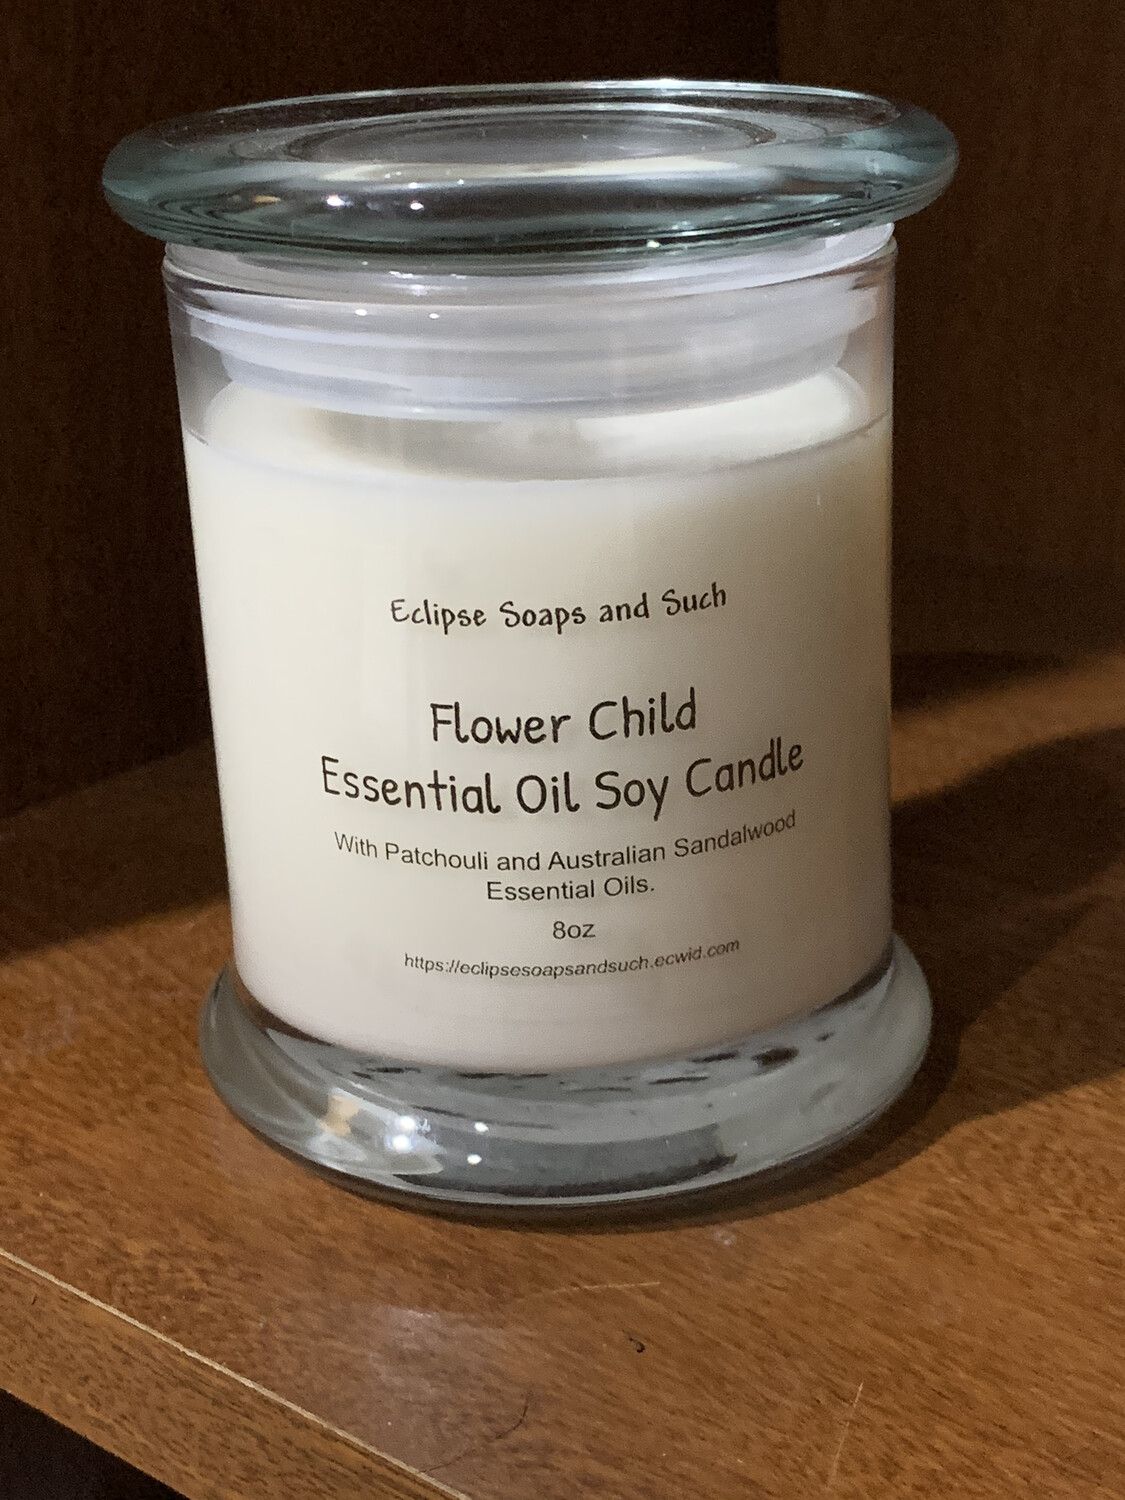 Flower Child Essential Oil Soy Candle 8oz